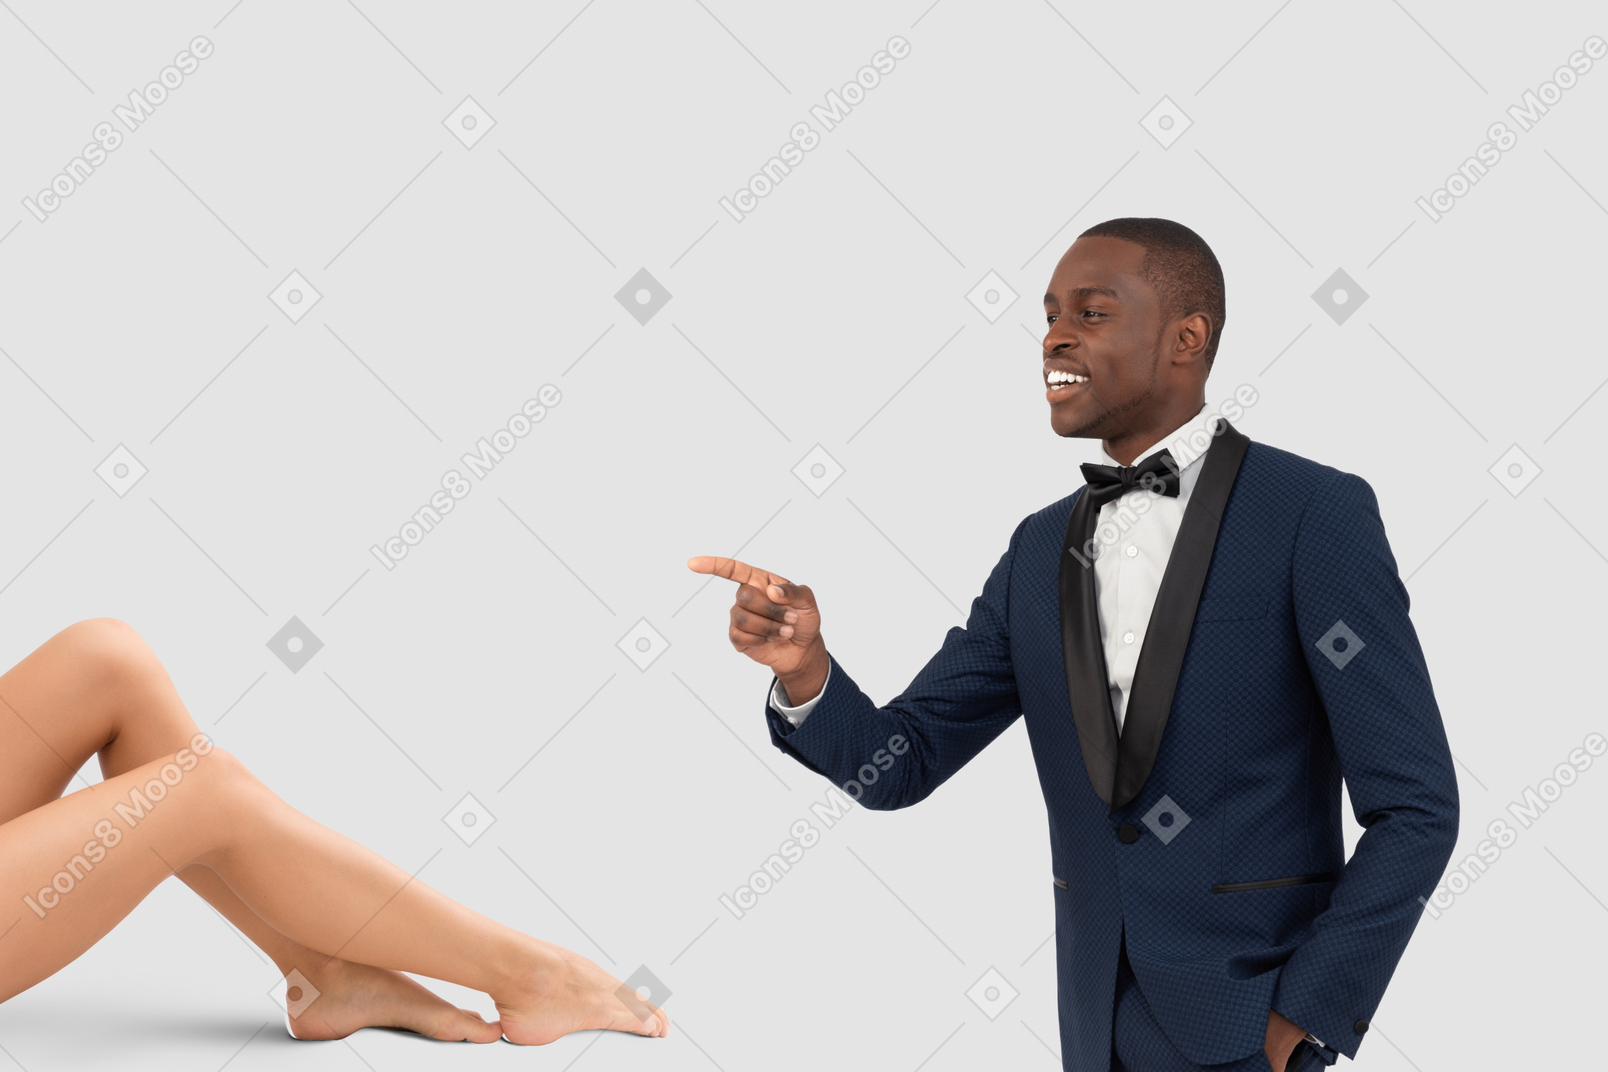 A man in a tuxedo pointing at a woman's legs